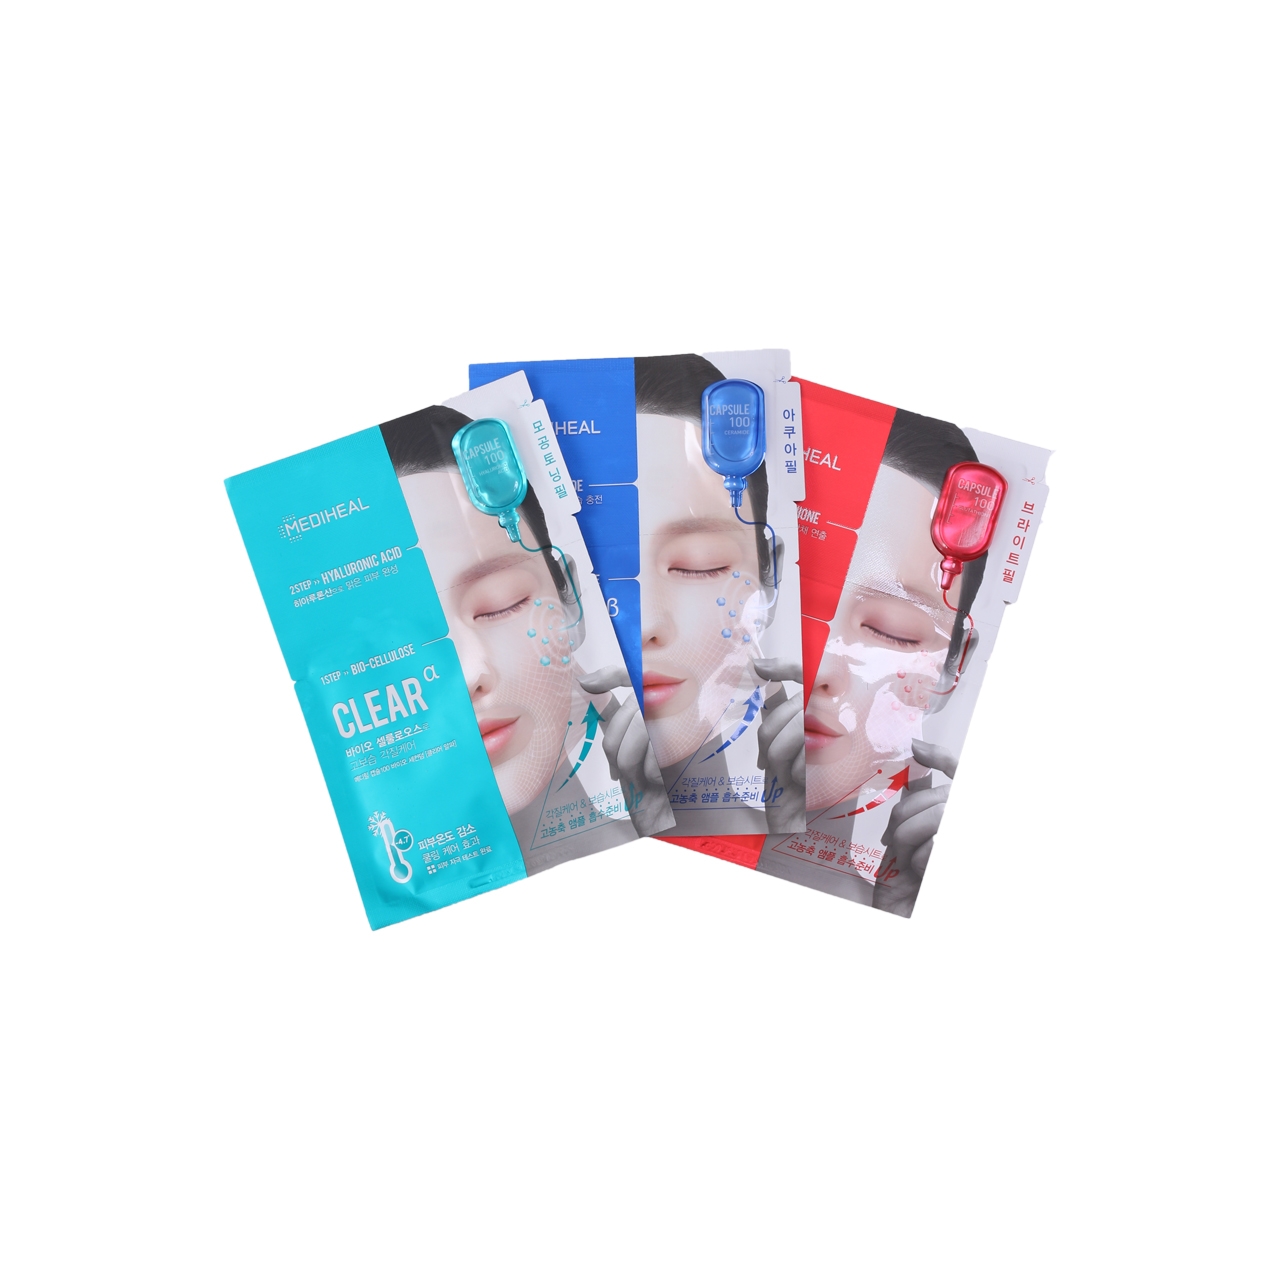 Medhieal Clear, Light, Hydro Capsule 100 Bio Seconderm Faces